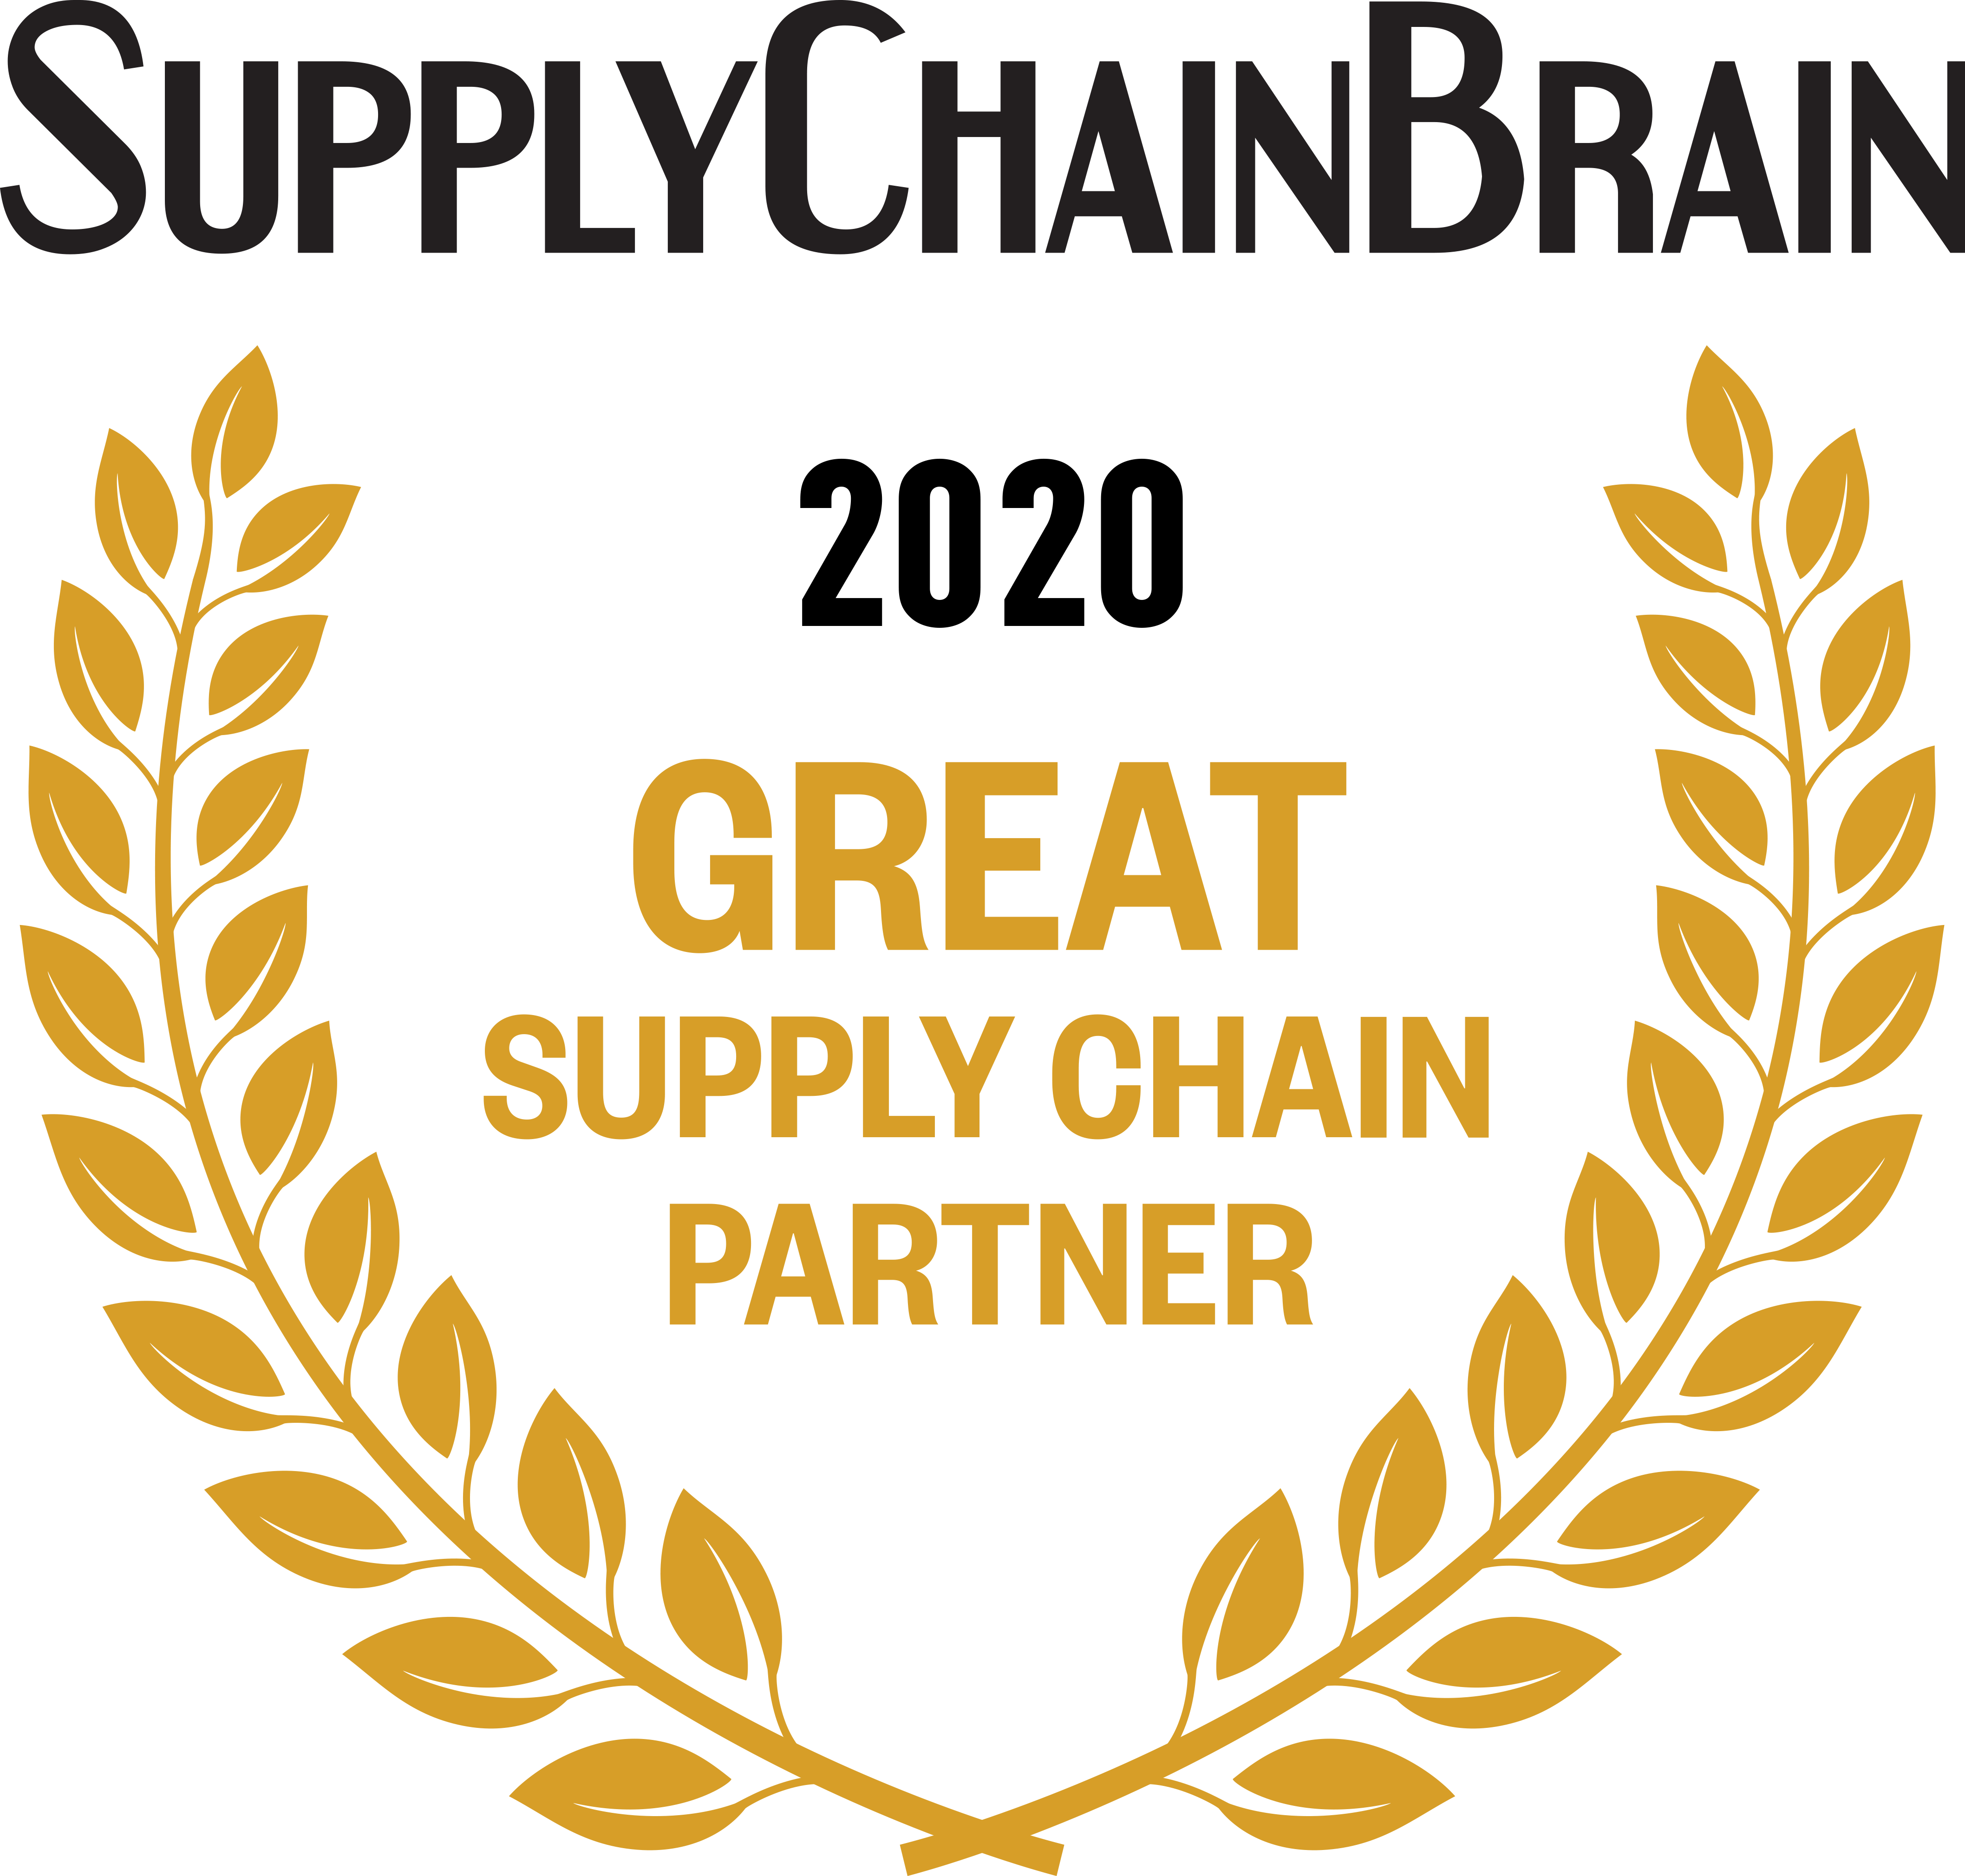 100 Great Supply Chain Partners: Meeting the Need for Speed